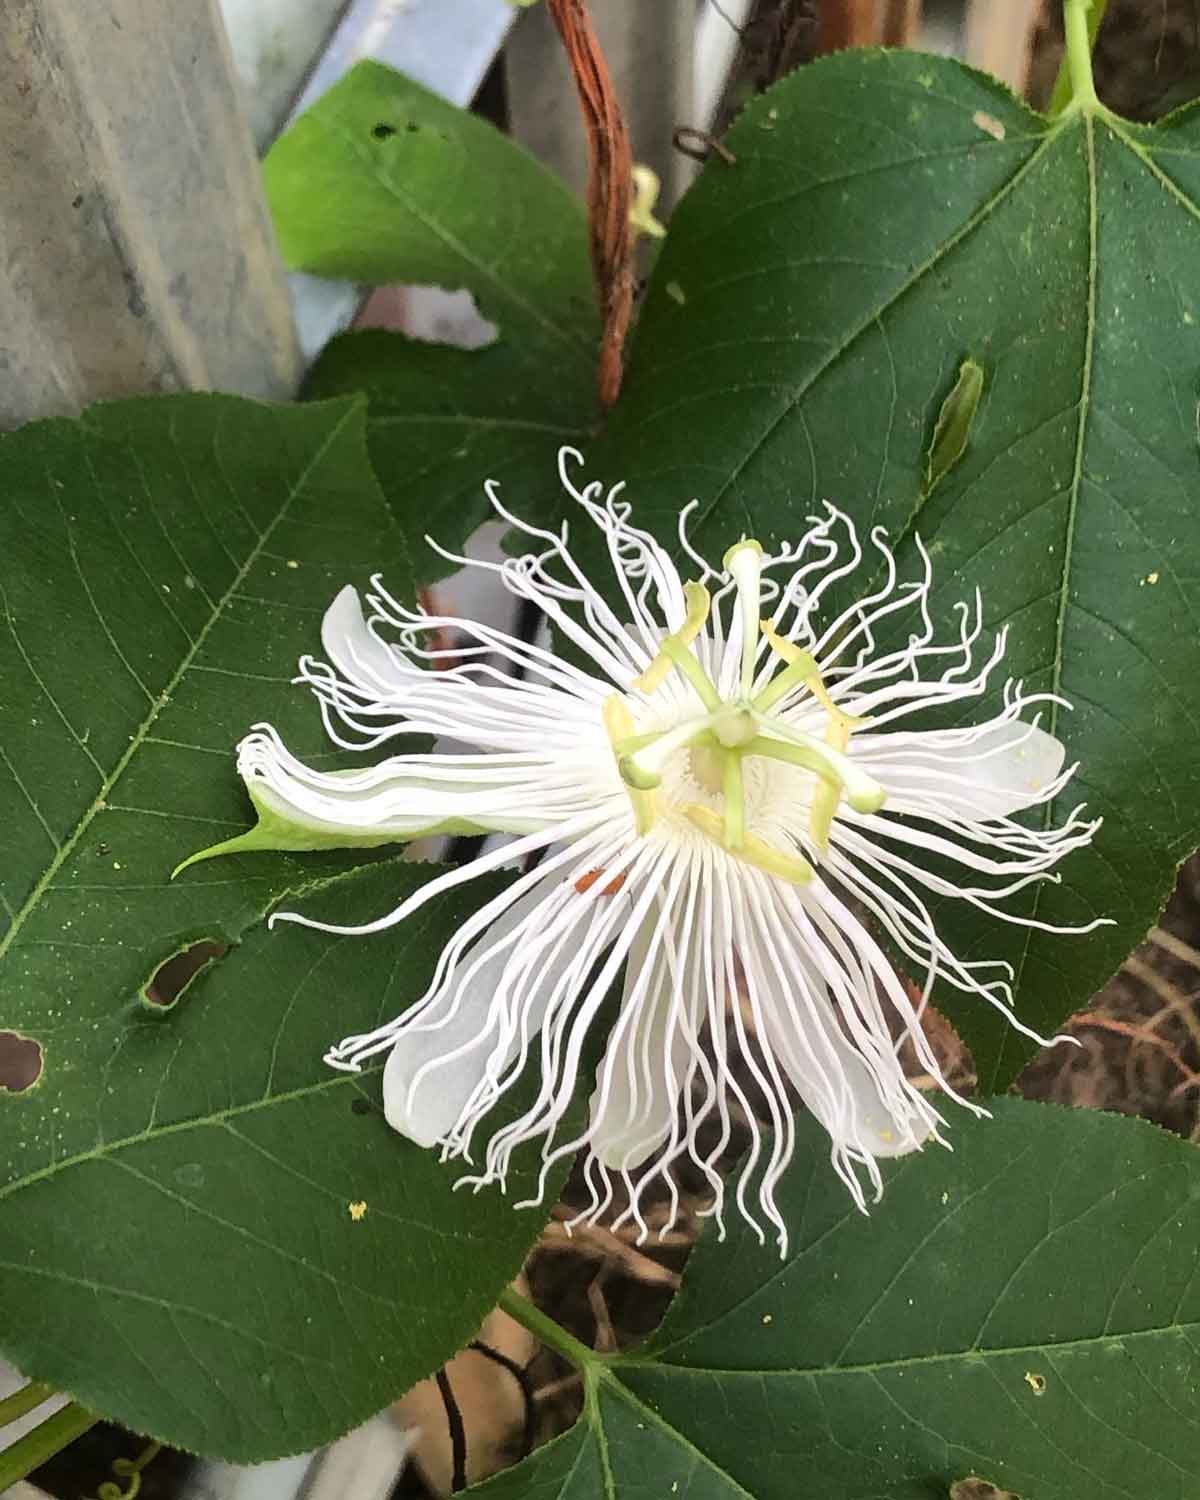 The flowers on my passionflower vine were white this year for some reason.